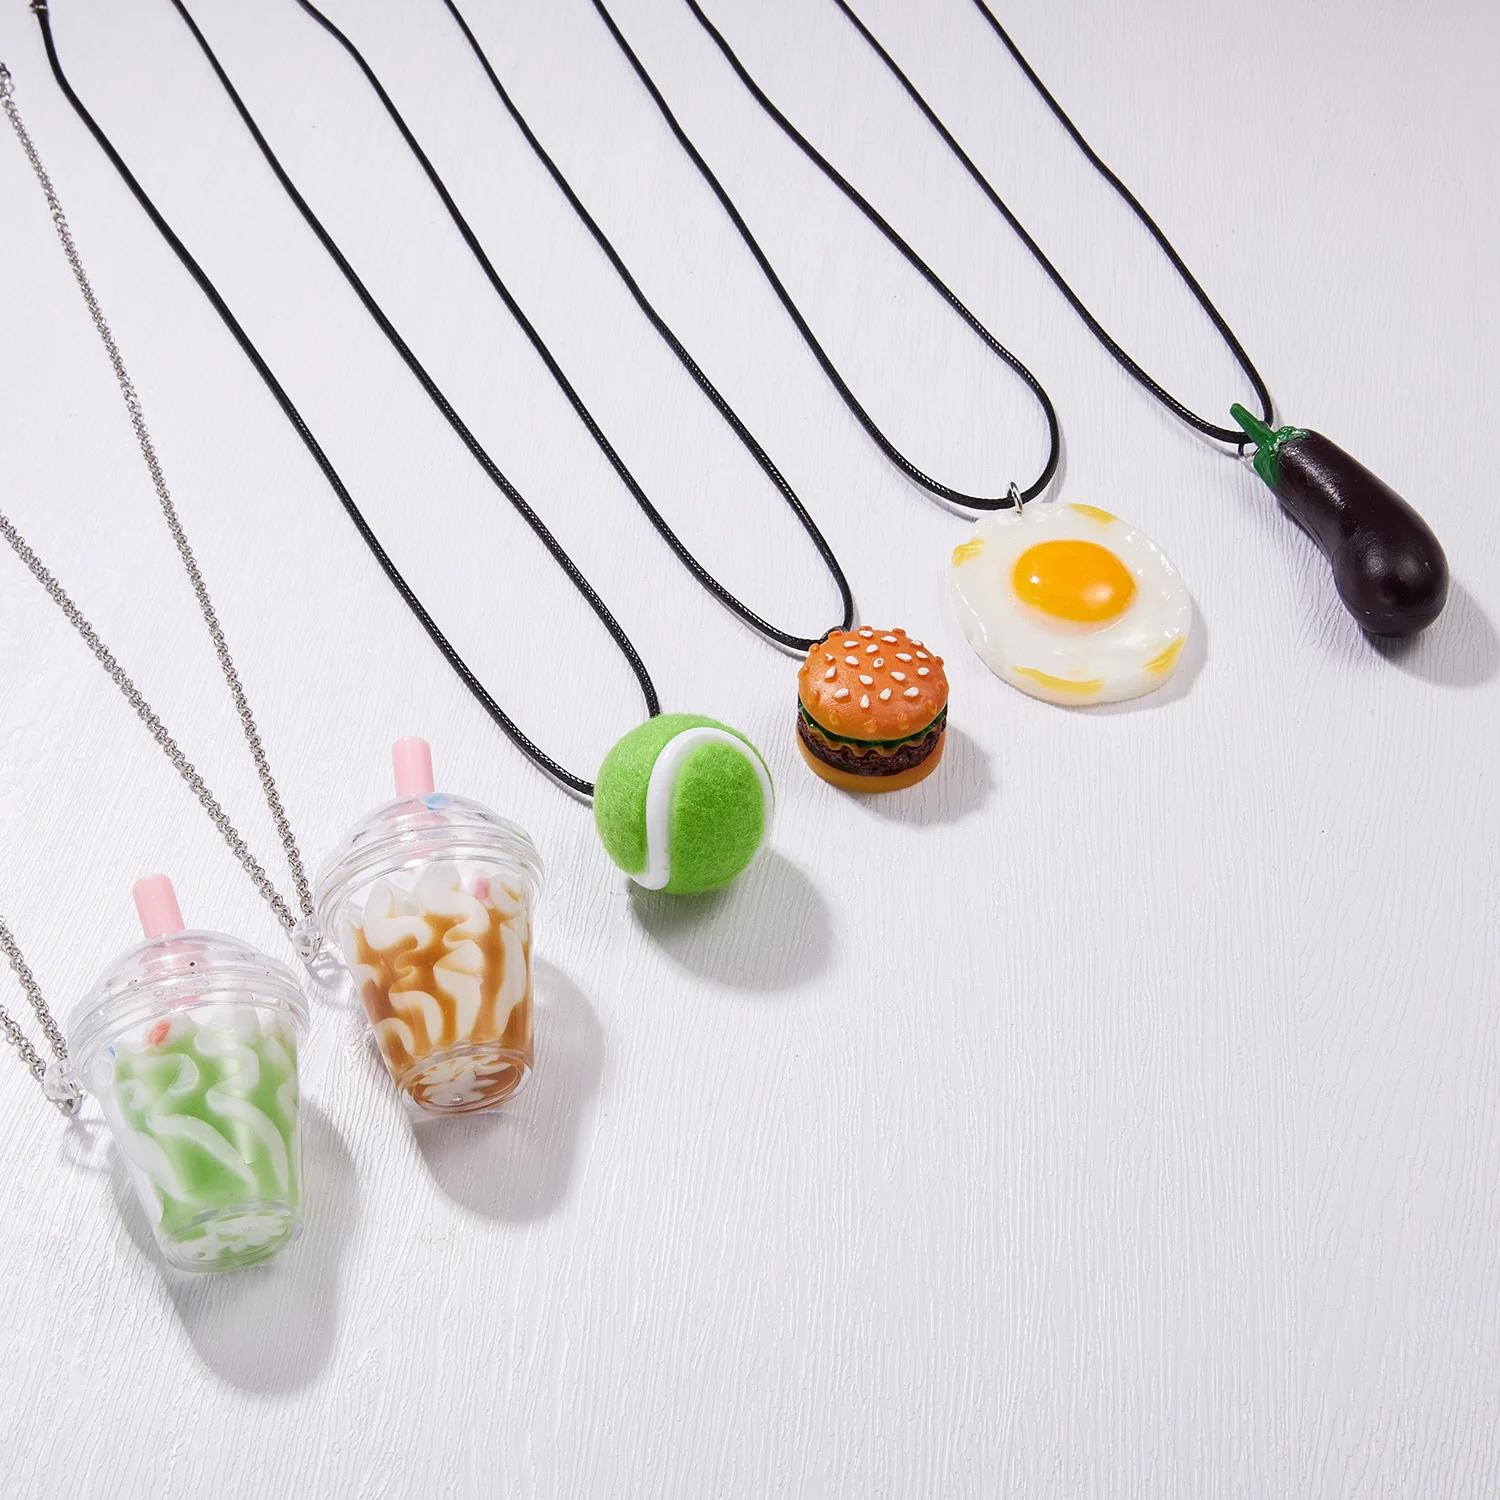 Green fig necklace,Fruit necklace,Miniature food necklaces,Fake food jewelry,Polymer  clay Fimo jewellery,Handmade